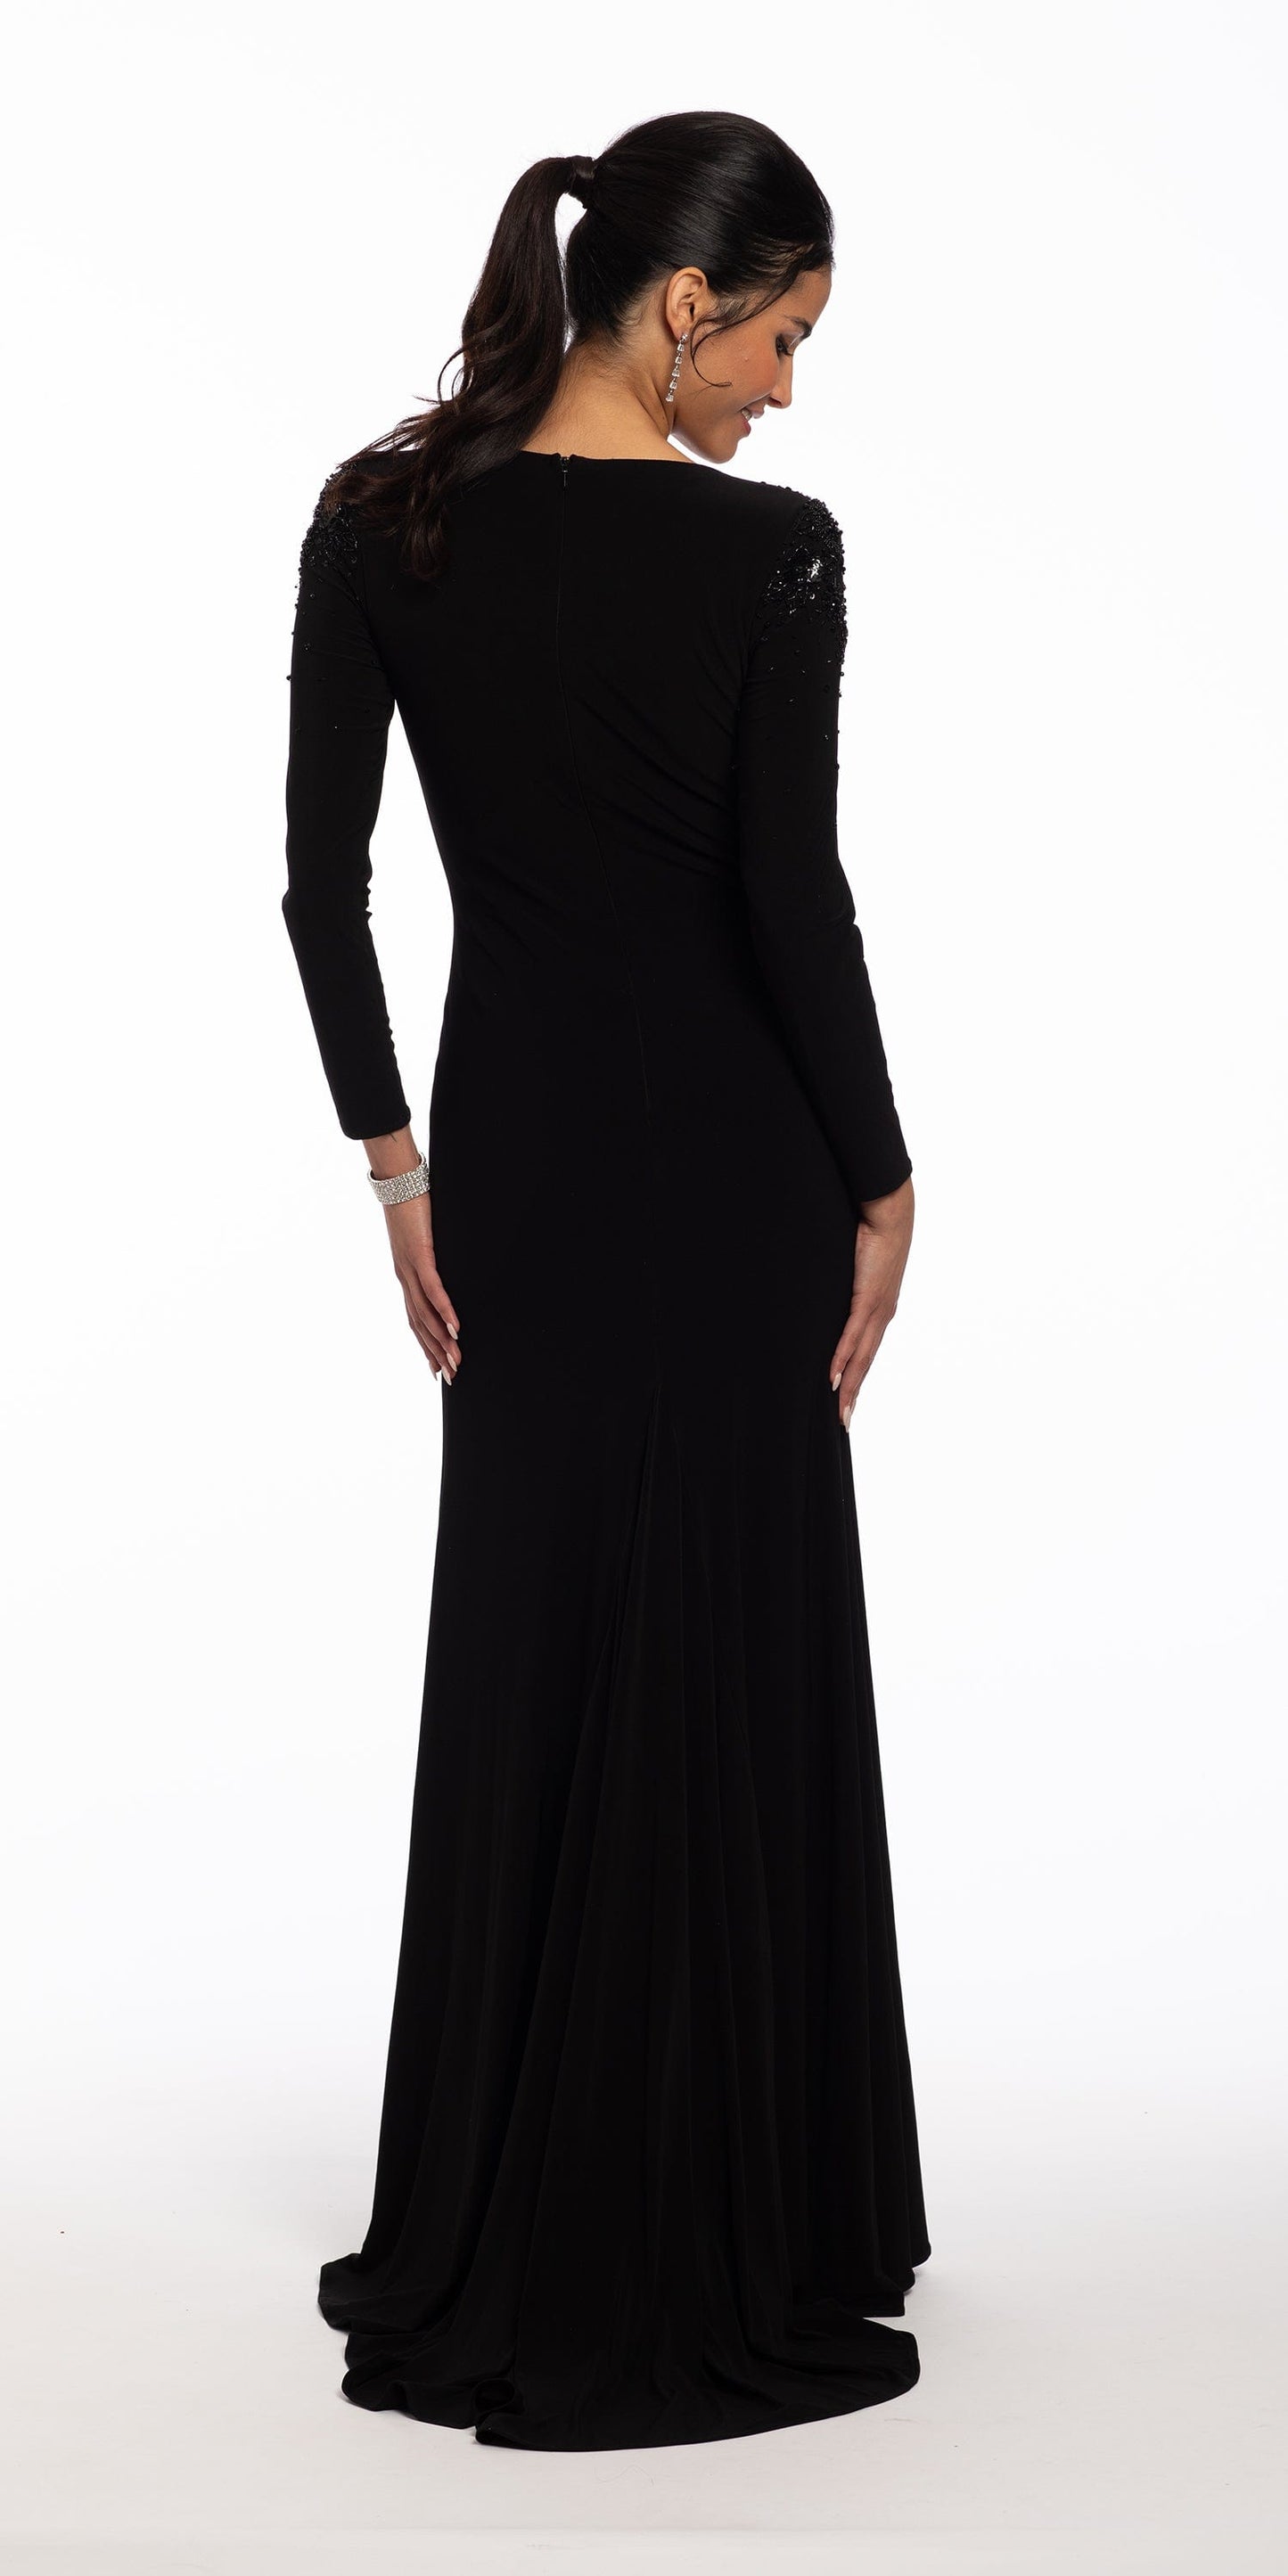 Camille La Vie Plunging  Long Sleeve Dress with Sweep Train